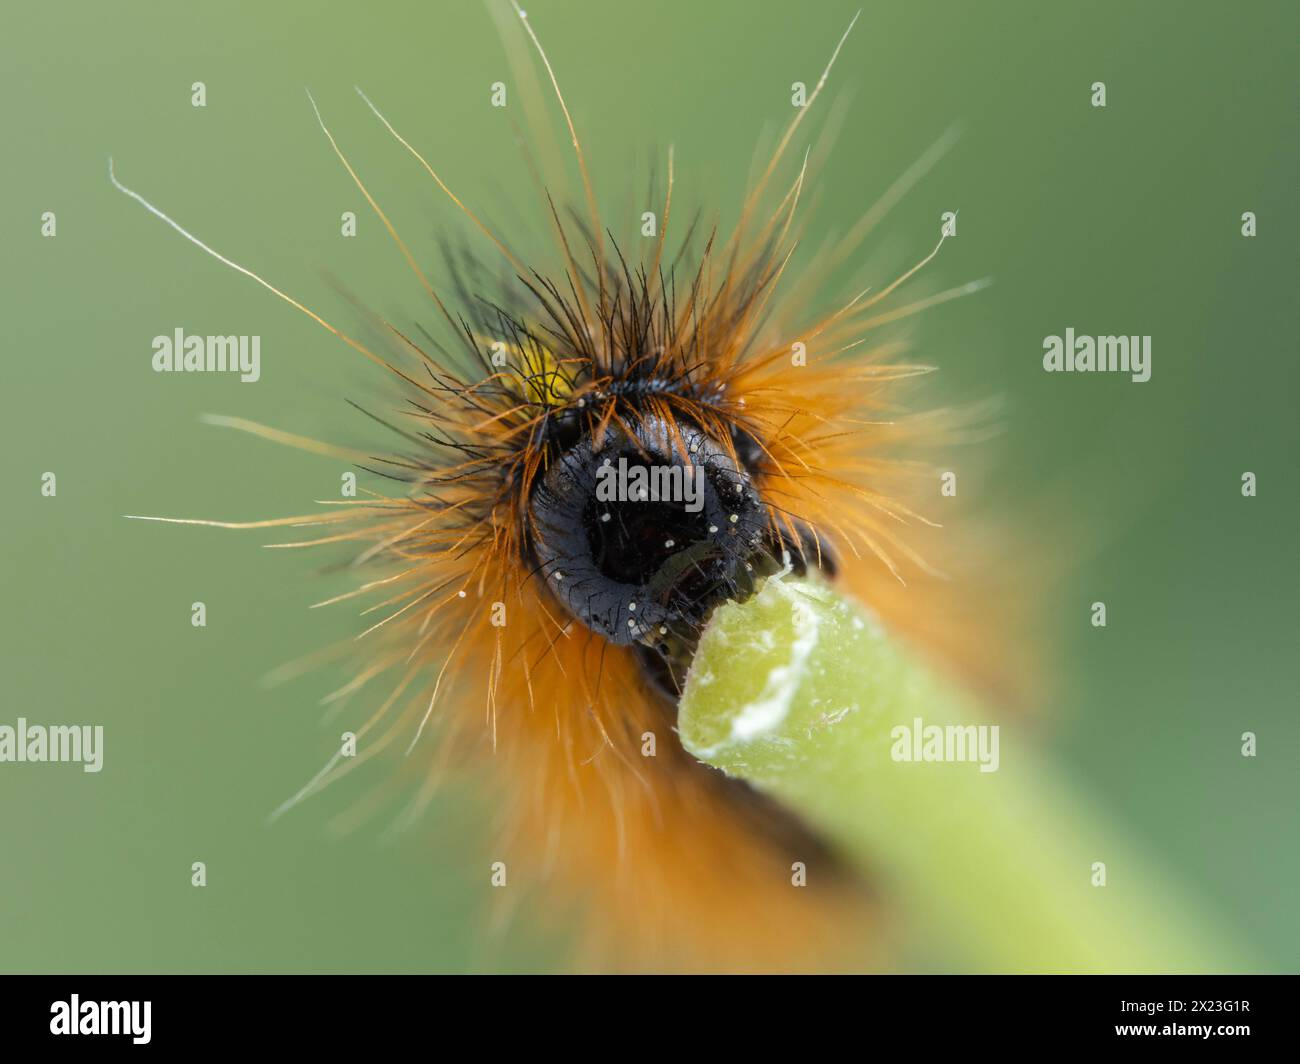 close-up of the head of a silver-spotted tiger moth caterpillar, Lophocampa argentata, speckled with pollen grains, chewing on a plant stem Stock Photo